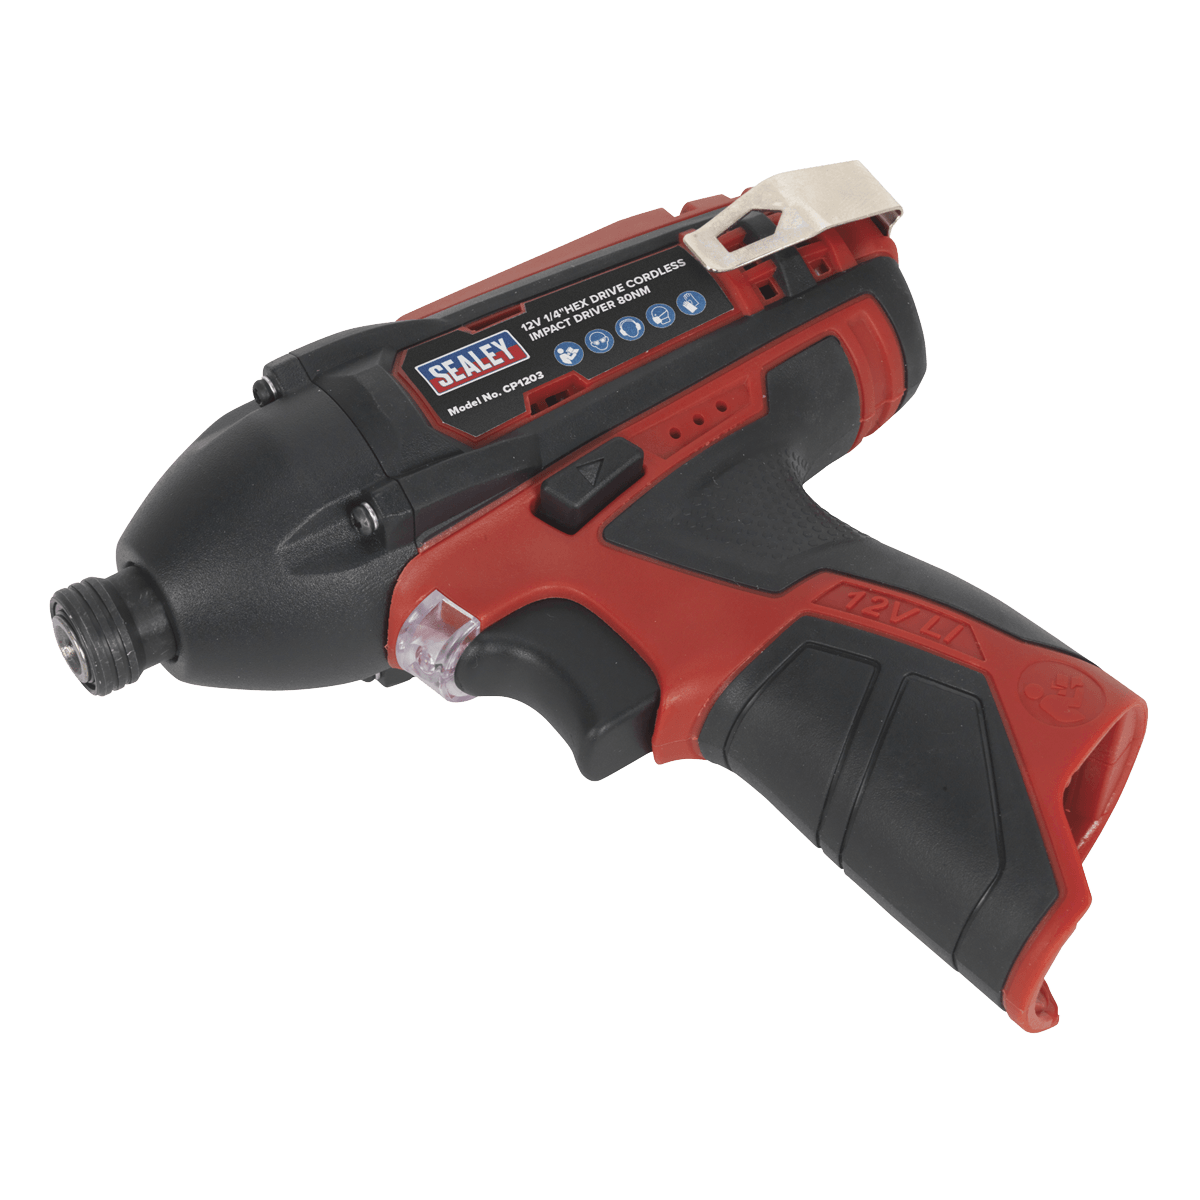 Sealey Cordless Impact Driver 1/4"Hex Drive 12V SV12 Series - Body Only CP1203 - Tools 2U Direct SW